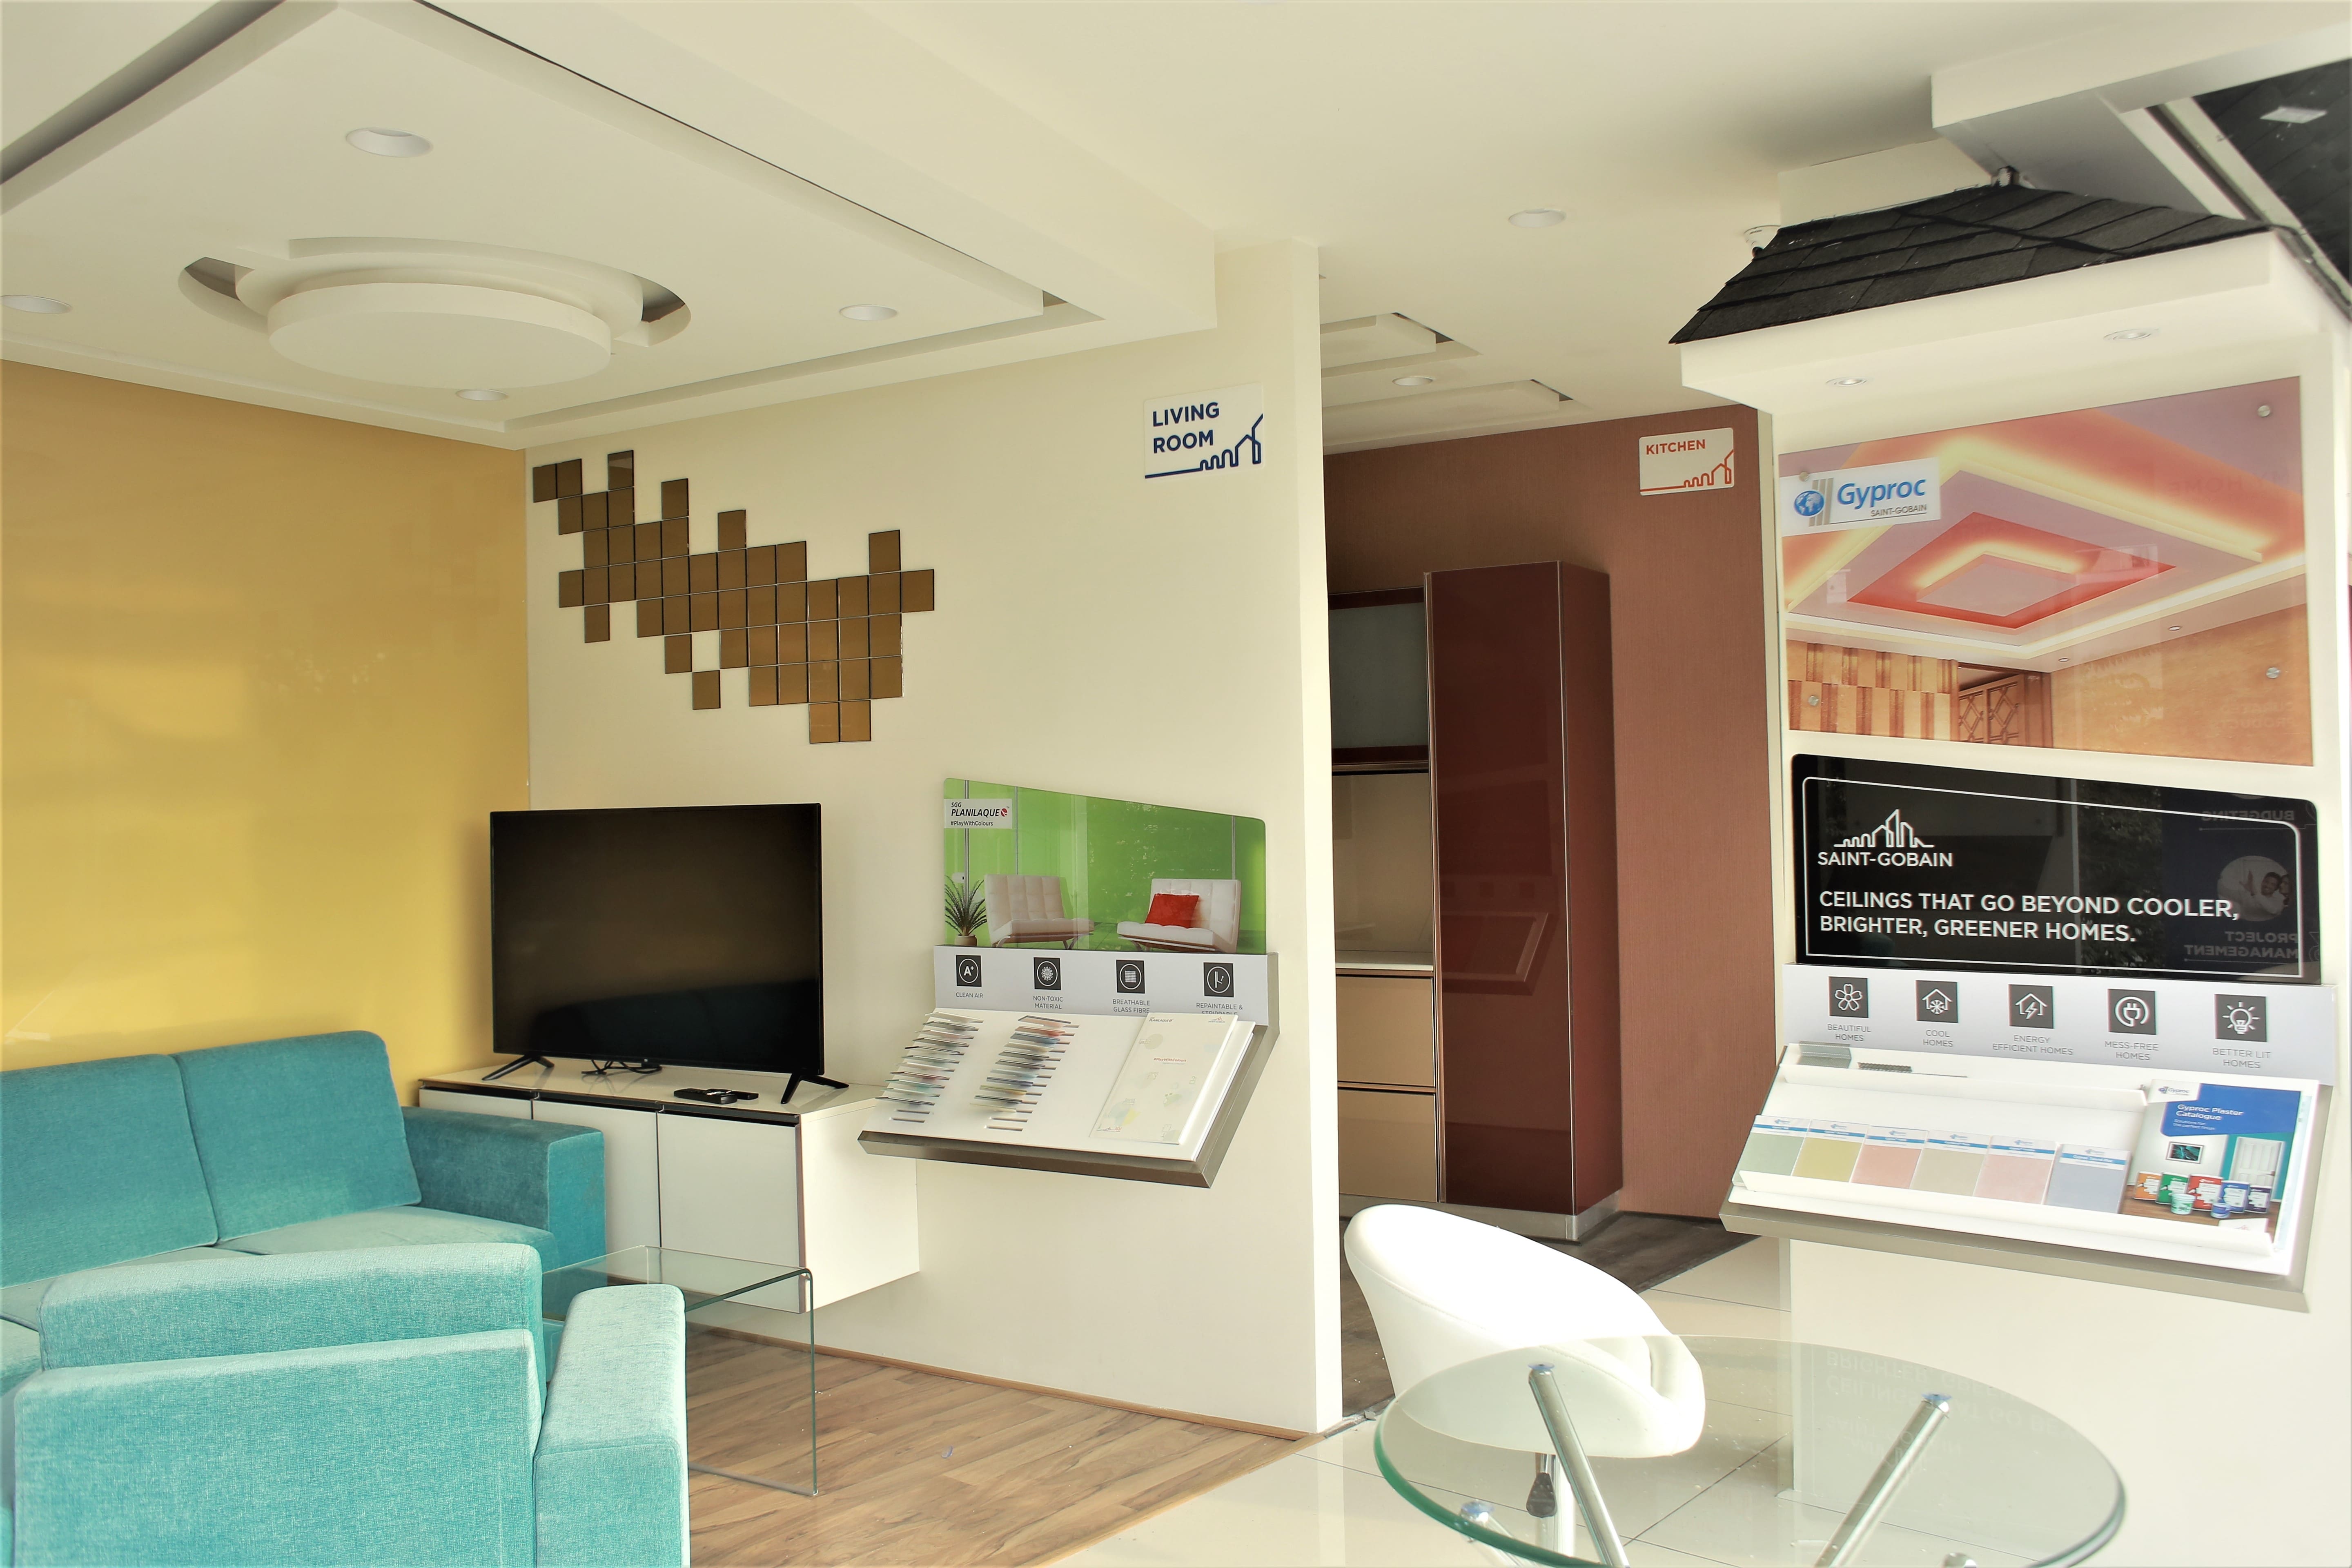 SAINT-GOBAIN INDIA UNVEILS ITS ‘FIRST’ EXCLUSIVE ‘MYHOME’ BRAND STORE IN KOCHI